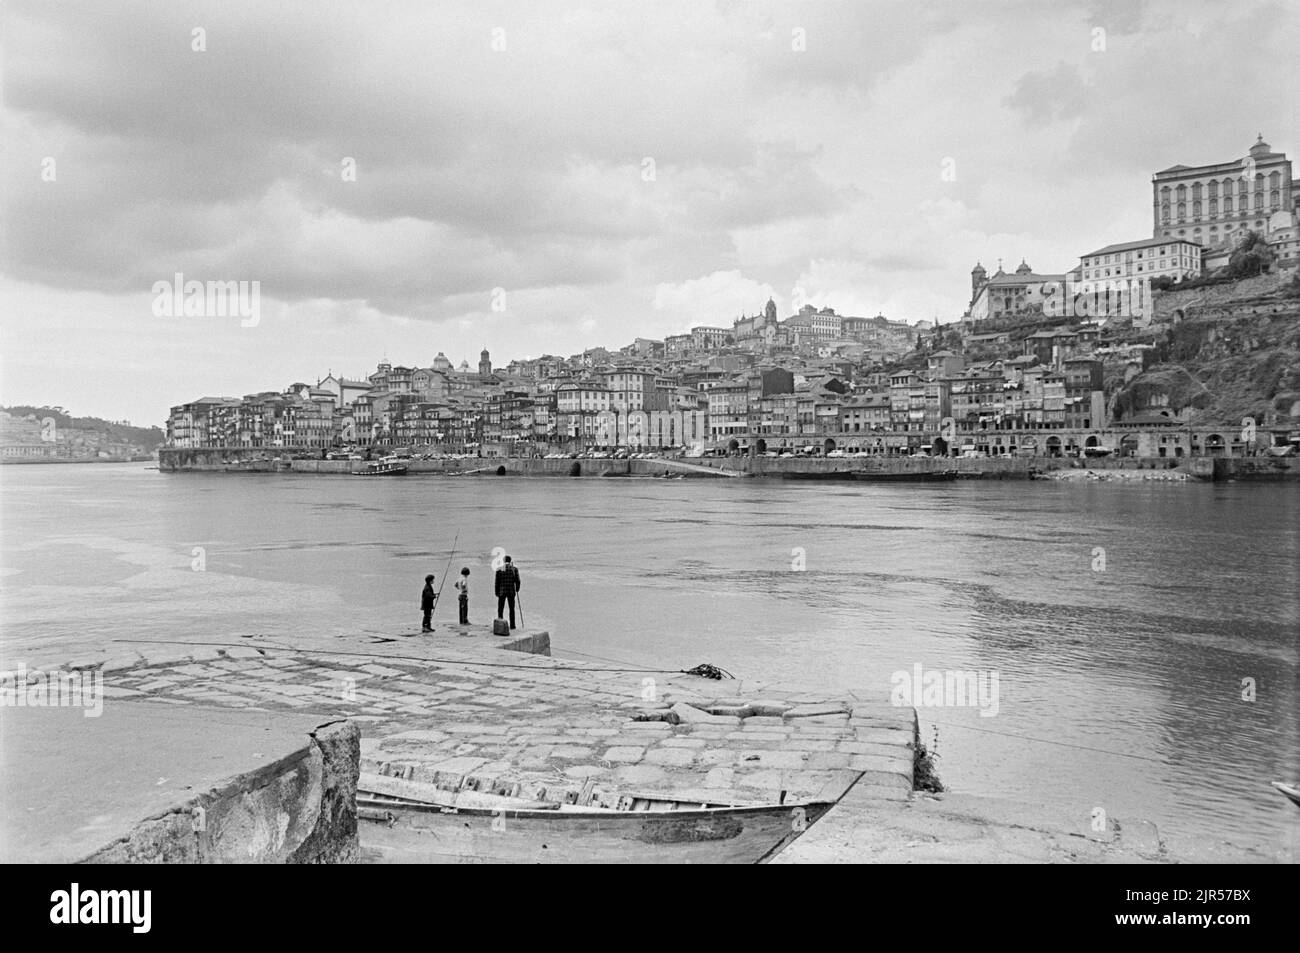 PORTUGAL - PORTO -  1970. Looking across the river Douro  towards the Ribeira district of Porto, Northern Portugal.  Copyright Photograph: by Peter Ea Stock Photo